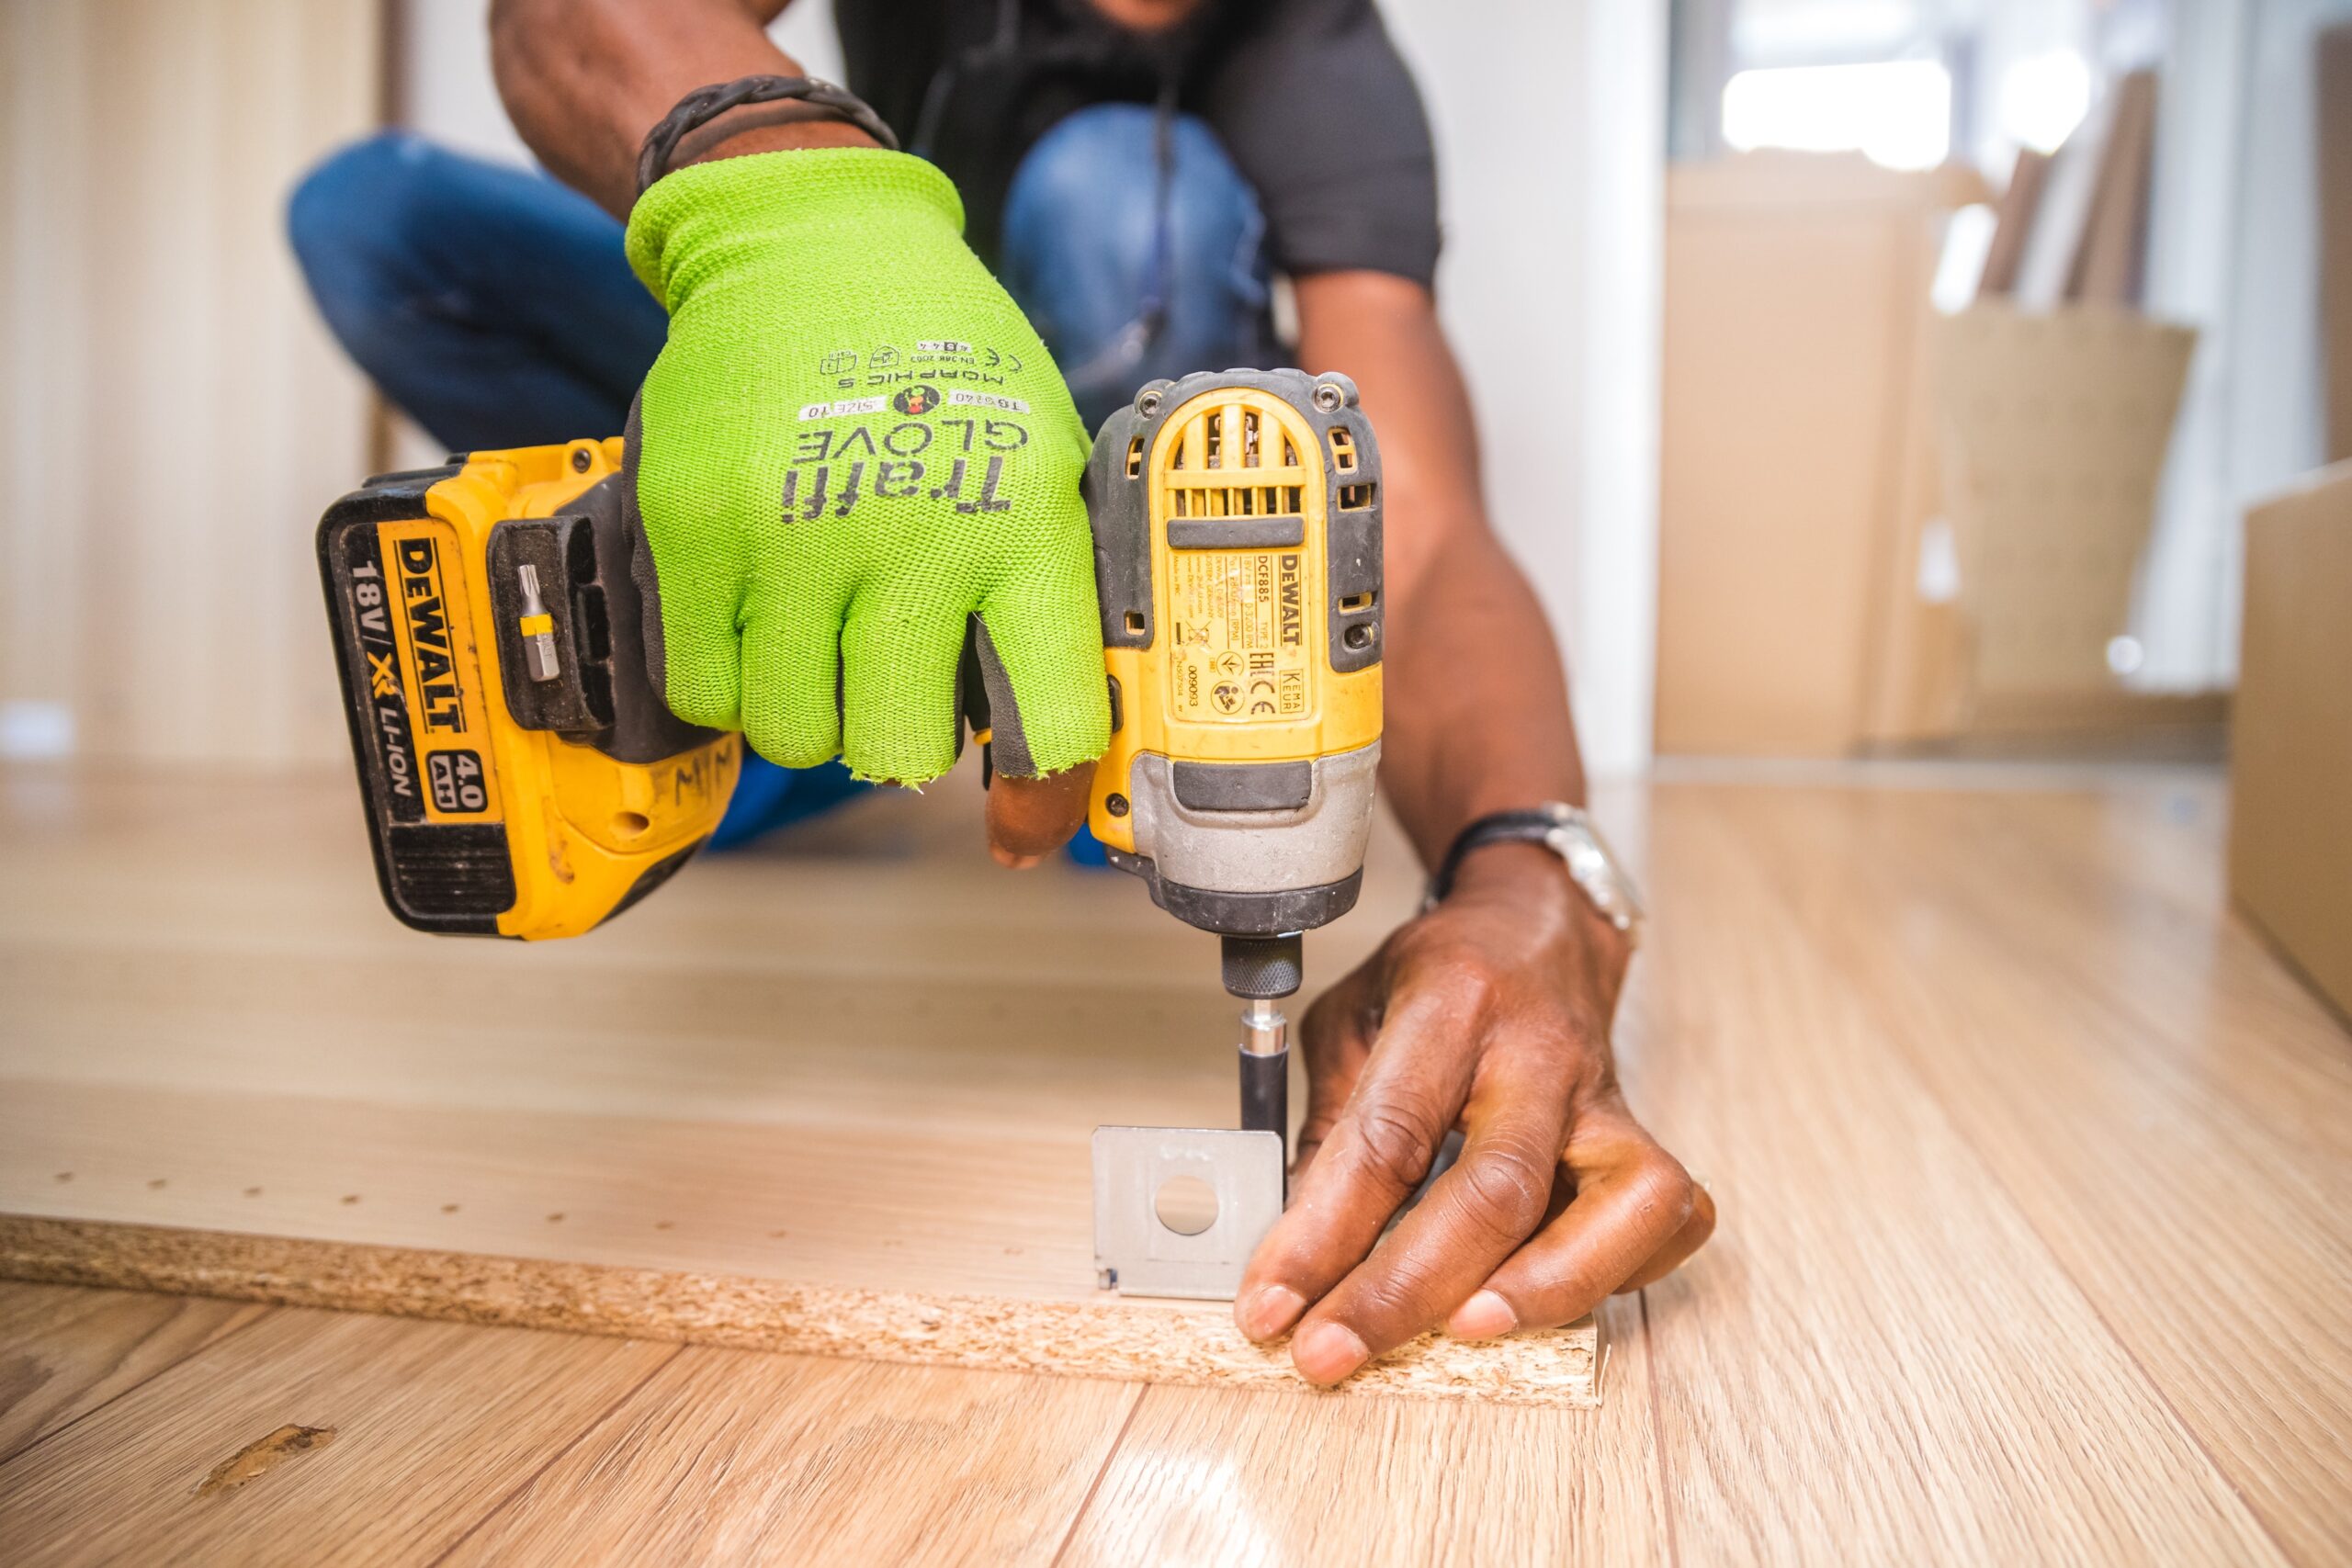 Drills are an essential item in the toolbox of both home improvement enthusiasts and trade experts. The appropriate drill can be used to bore holes, loosen or tighten fasteners, and even chisel away materials